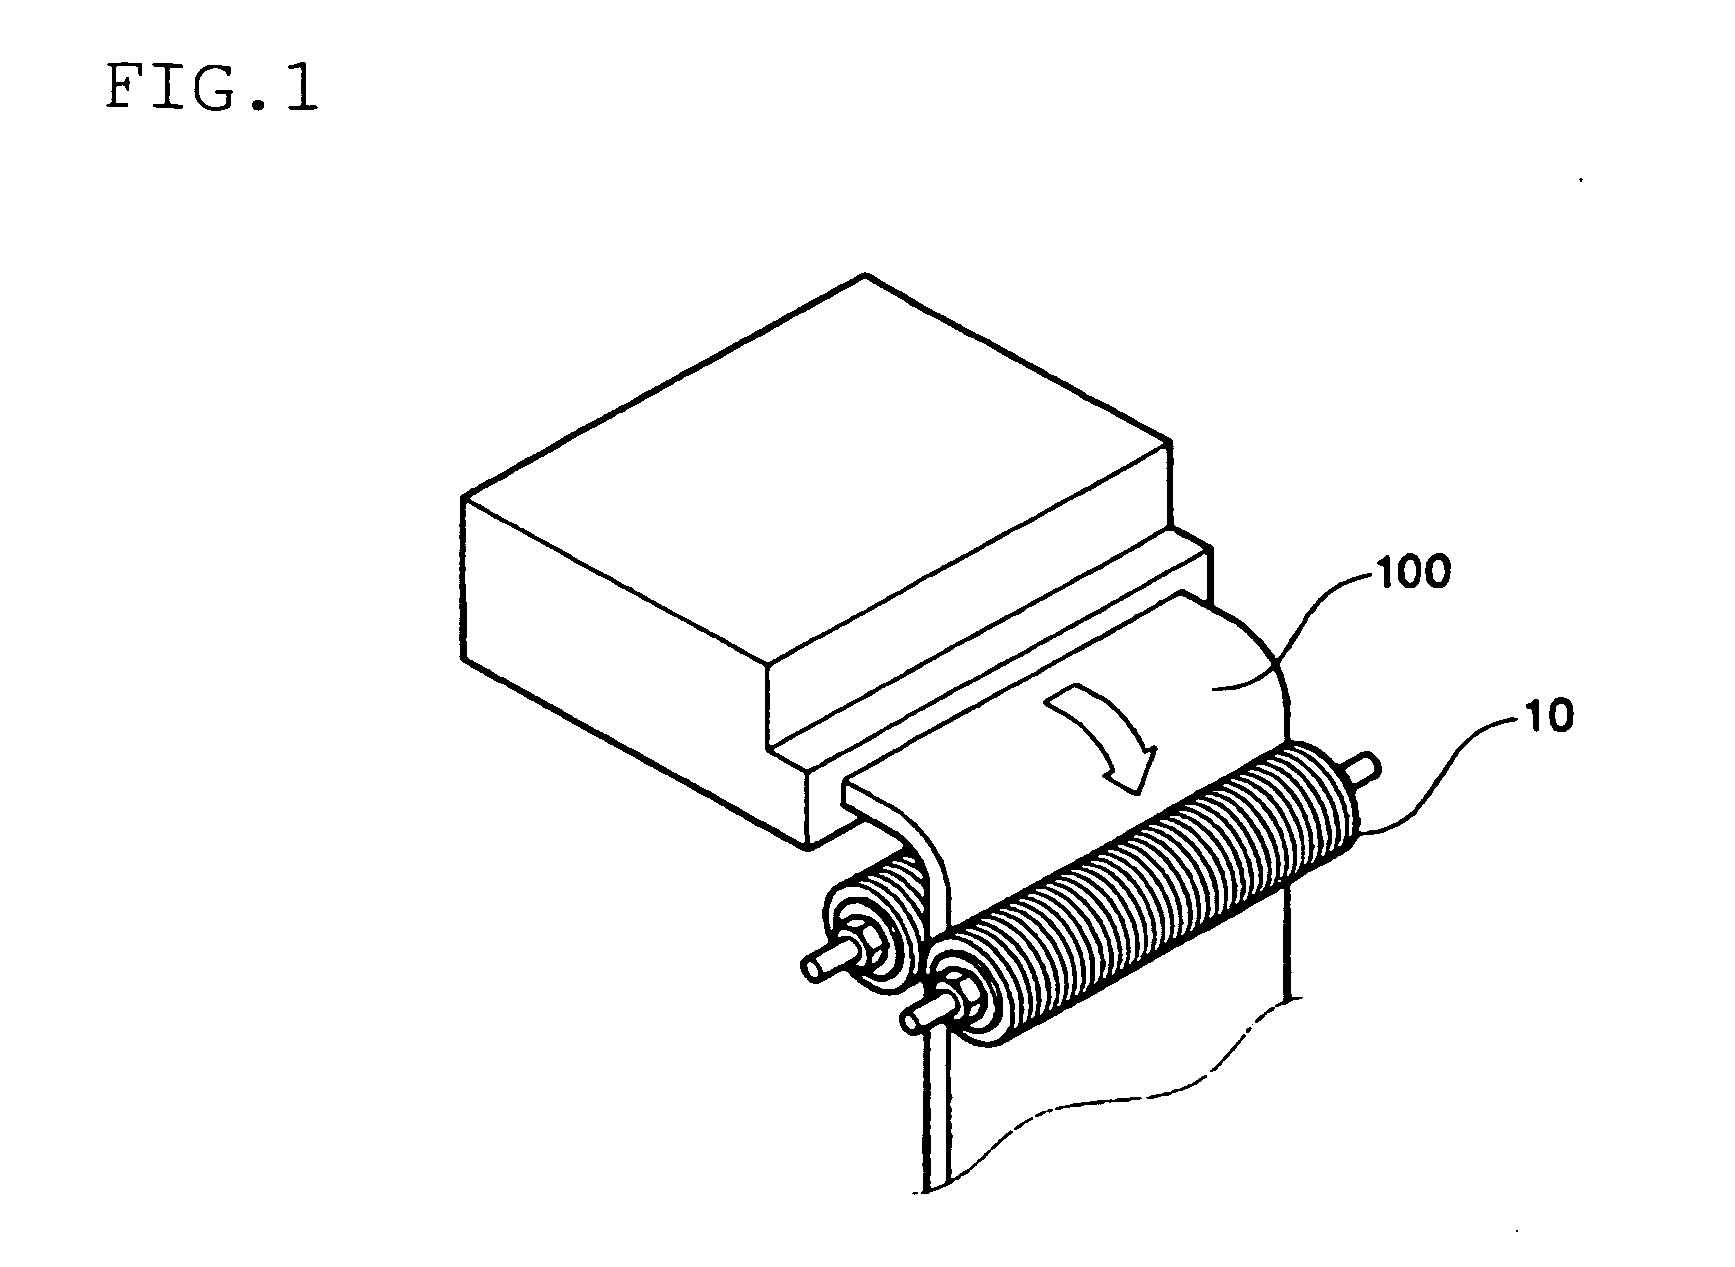 Disk roll and base material thereof